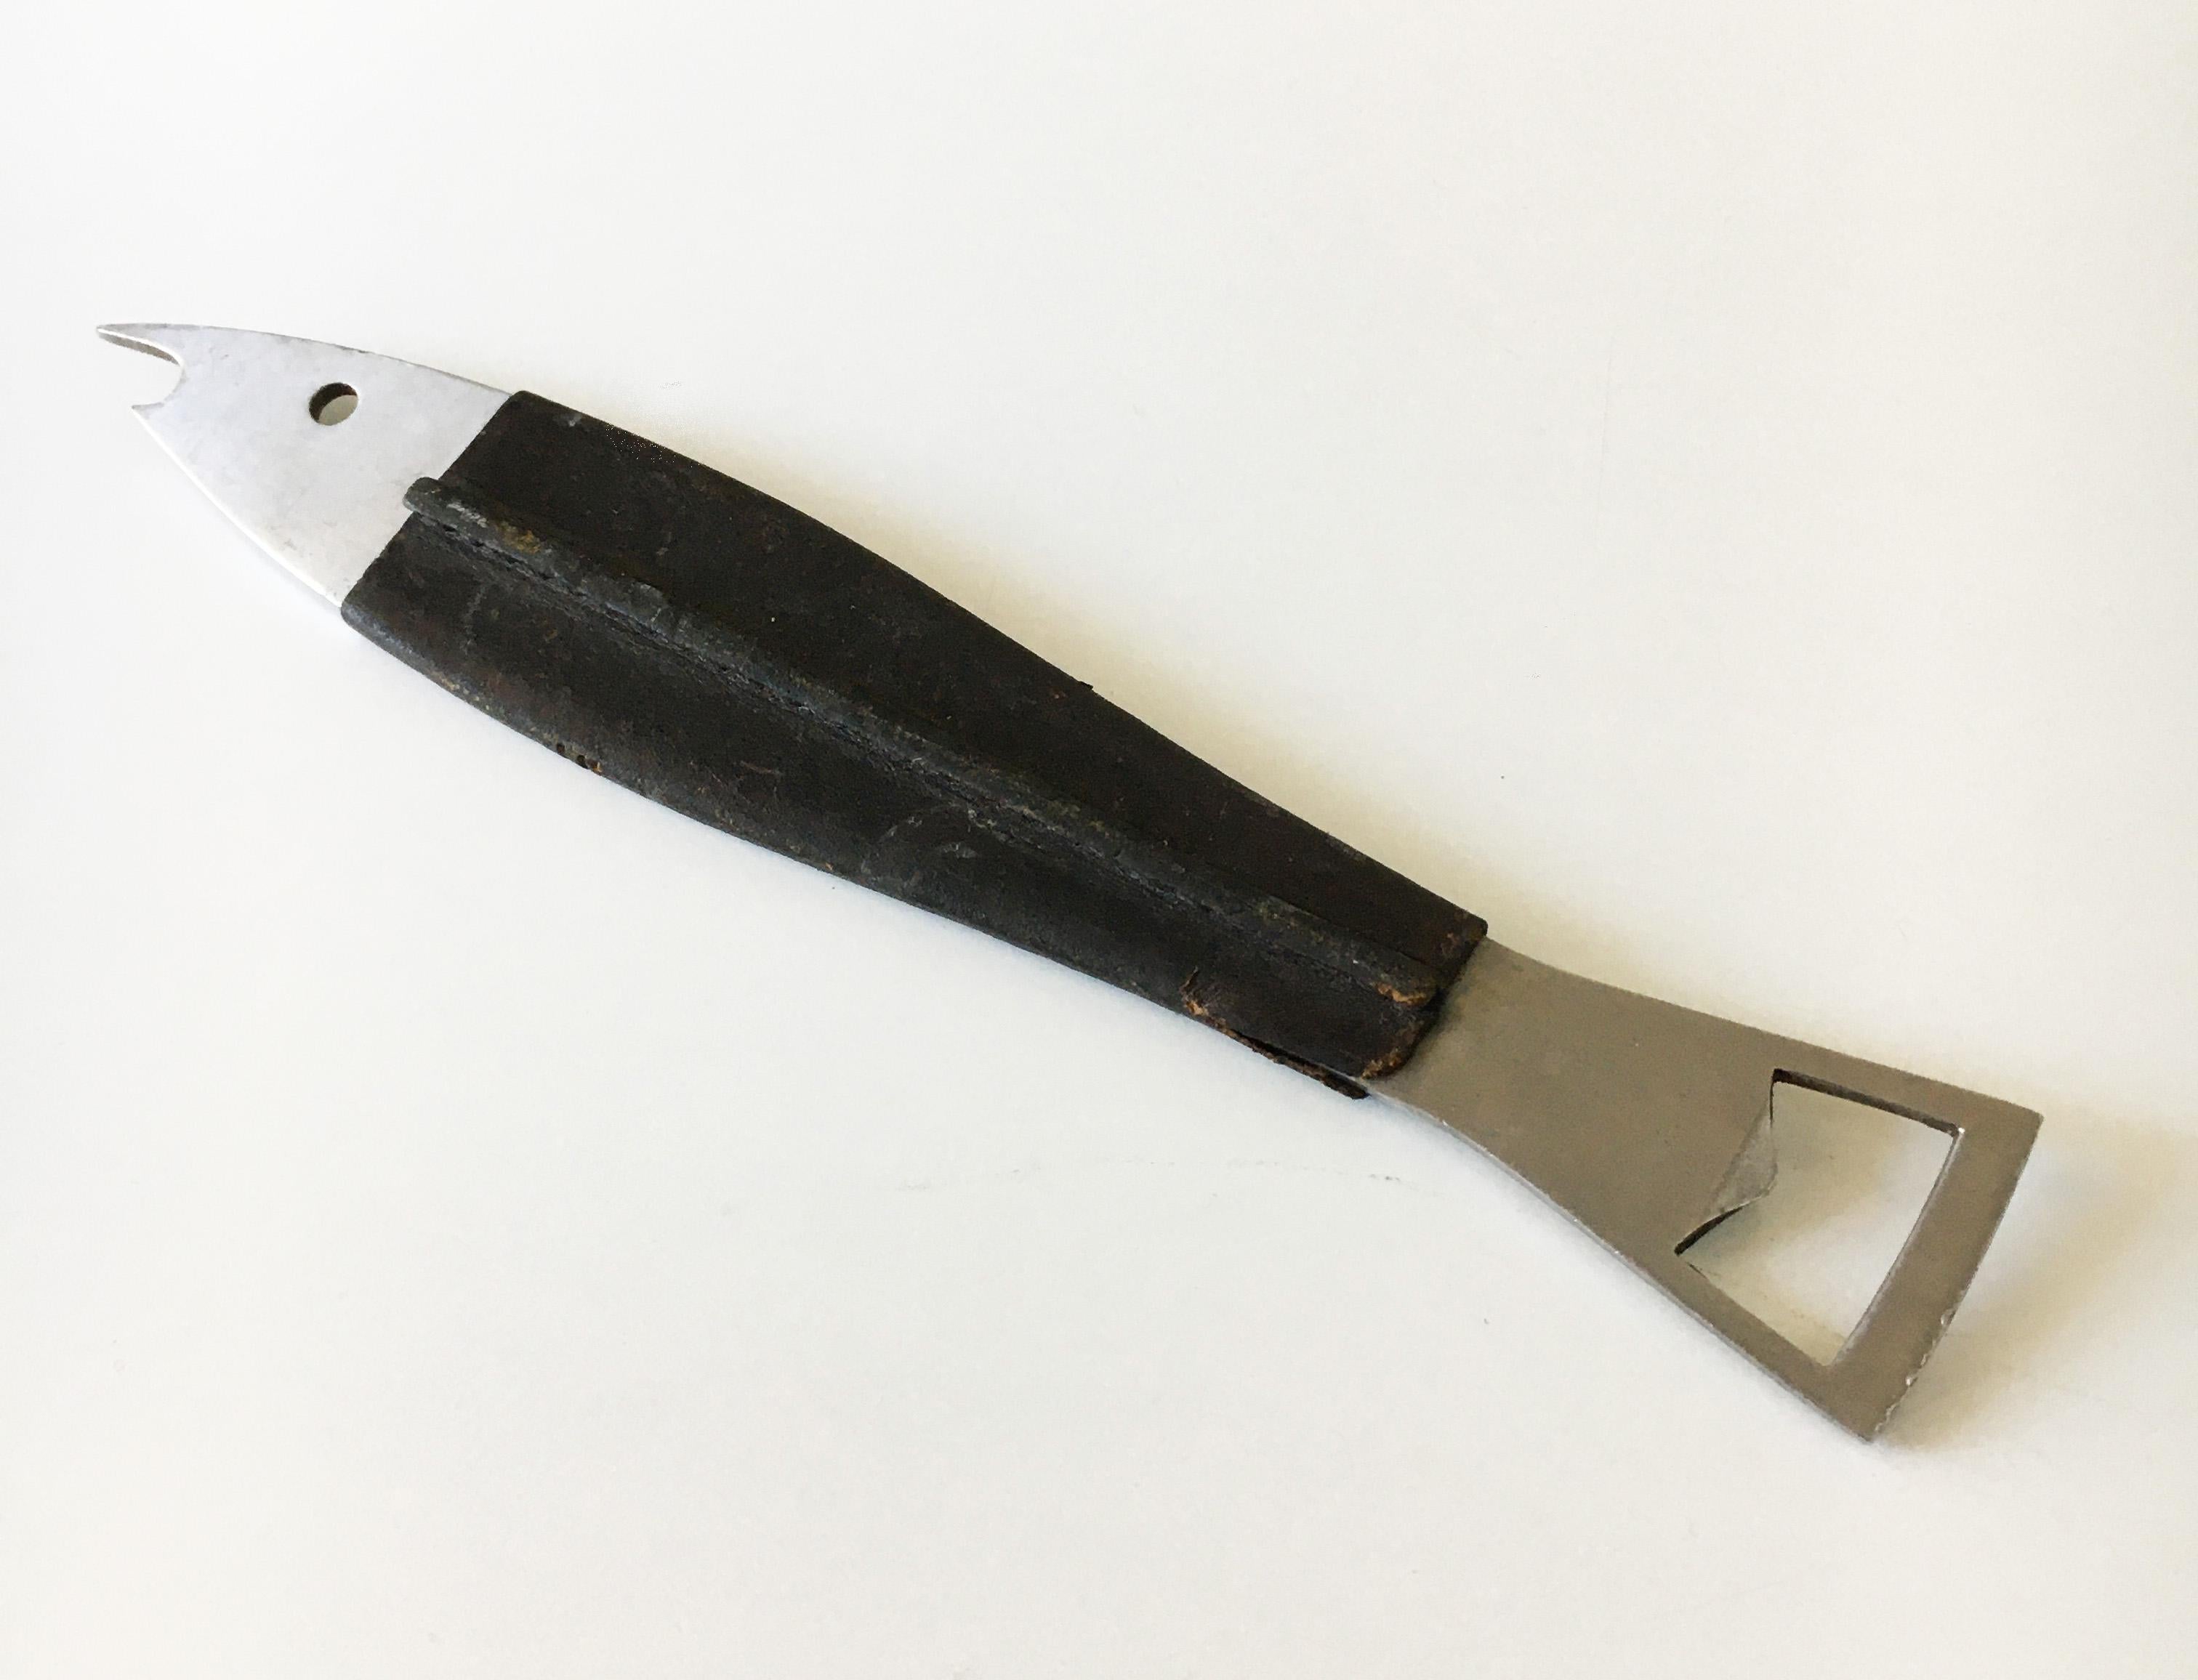 A beautiful fish-shaped modernist bottle opener from the 1950s 'Model No. 4687' made of stainless steel, covered with black leather. Designed by Carl Auböck. Executed by Amboss Austria. Some wear on the leather. Marked: AUBÖCK & STAINLESS AUSTRIA.